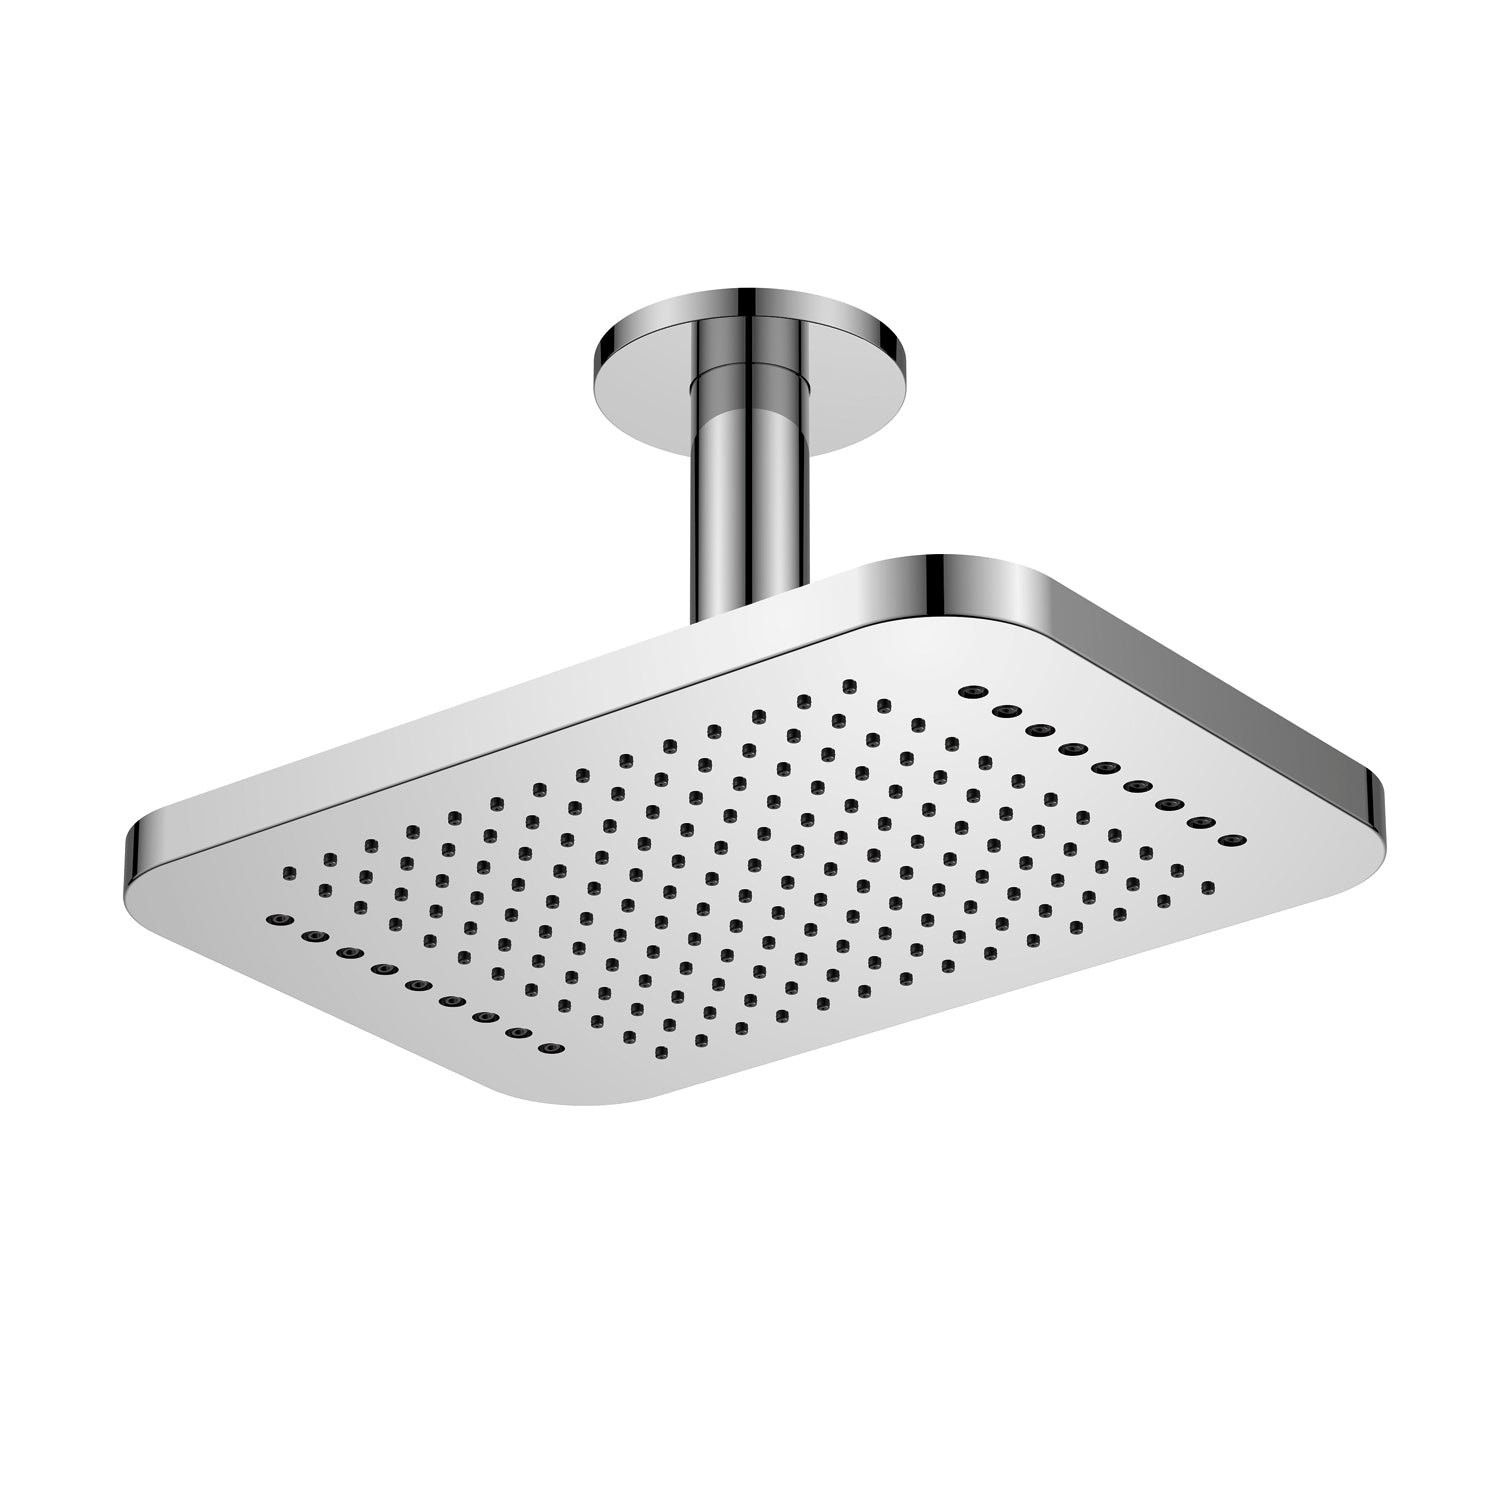 DAX Ceiling Mounted Square Rain Shower Head with Shower Arm, Brushed Nickel Finish, 12-1/4 x 11/16 Inches (DAX-B16-BN)